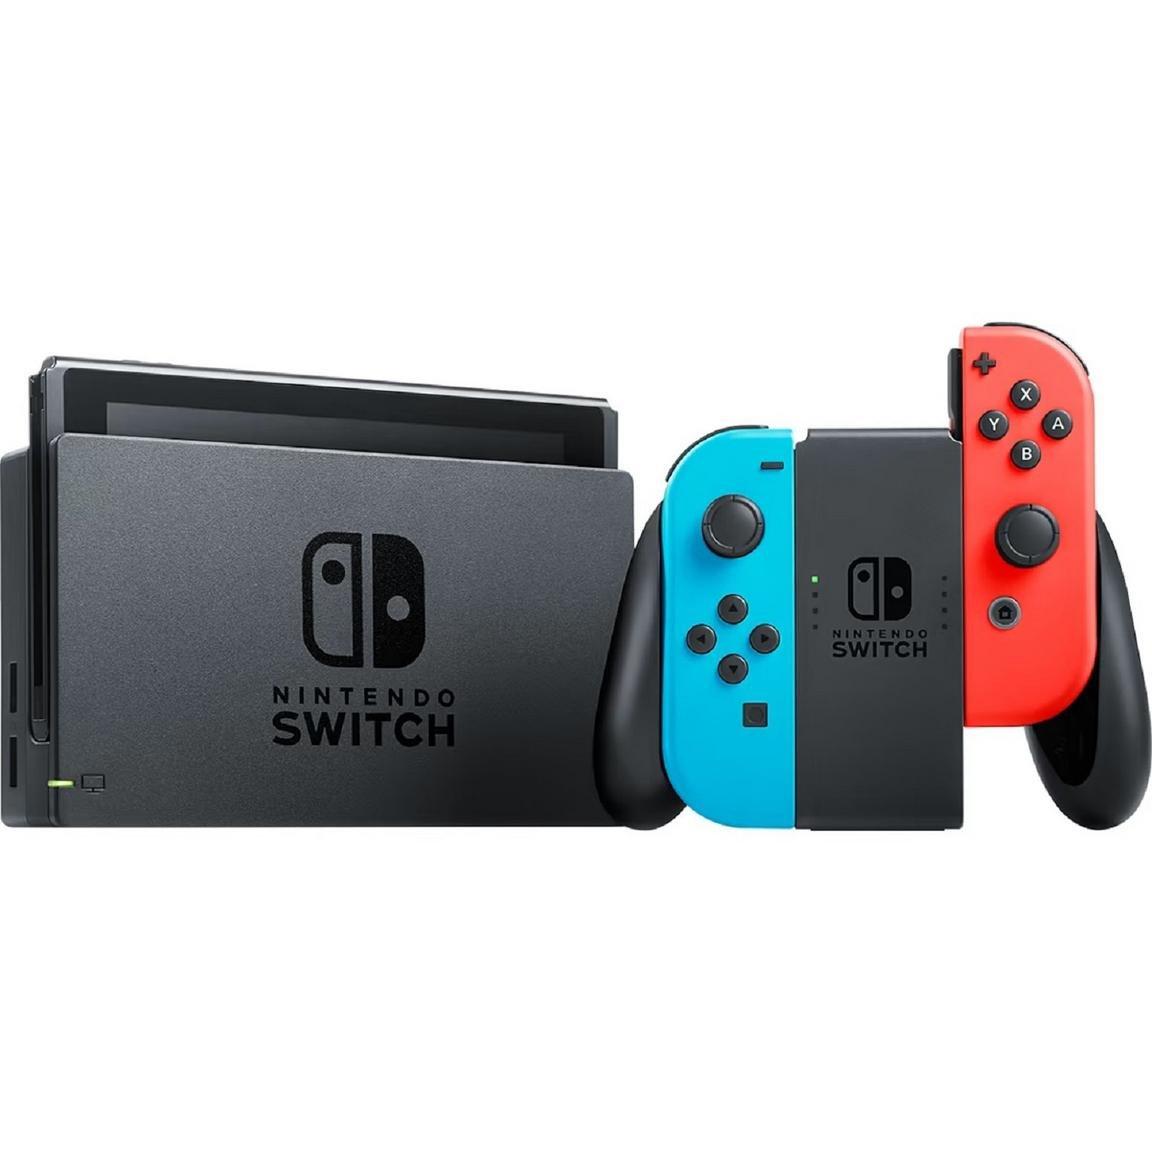 Nintendo Switch with Neon Blue/Neon Red Joy-Con Controller